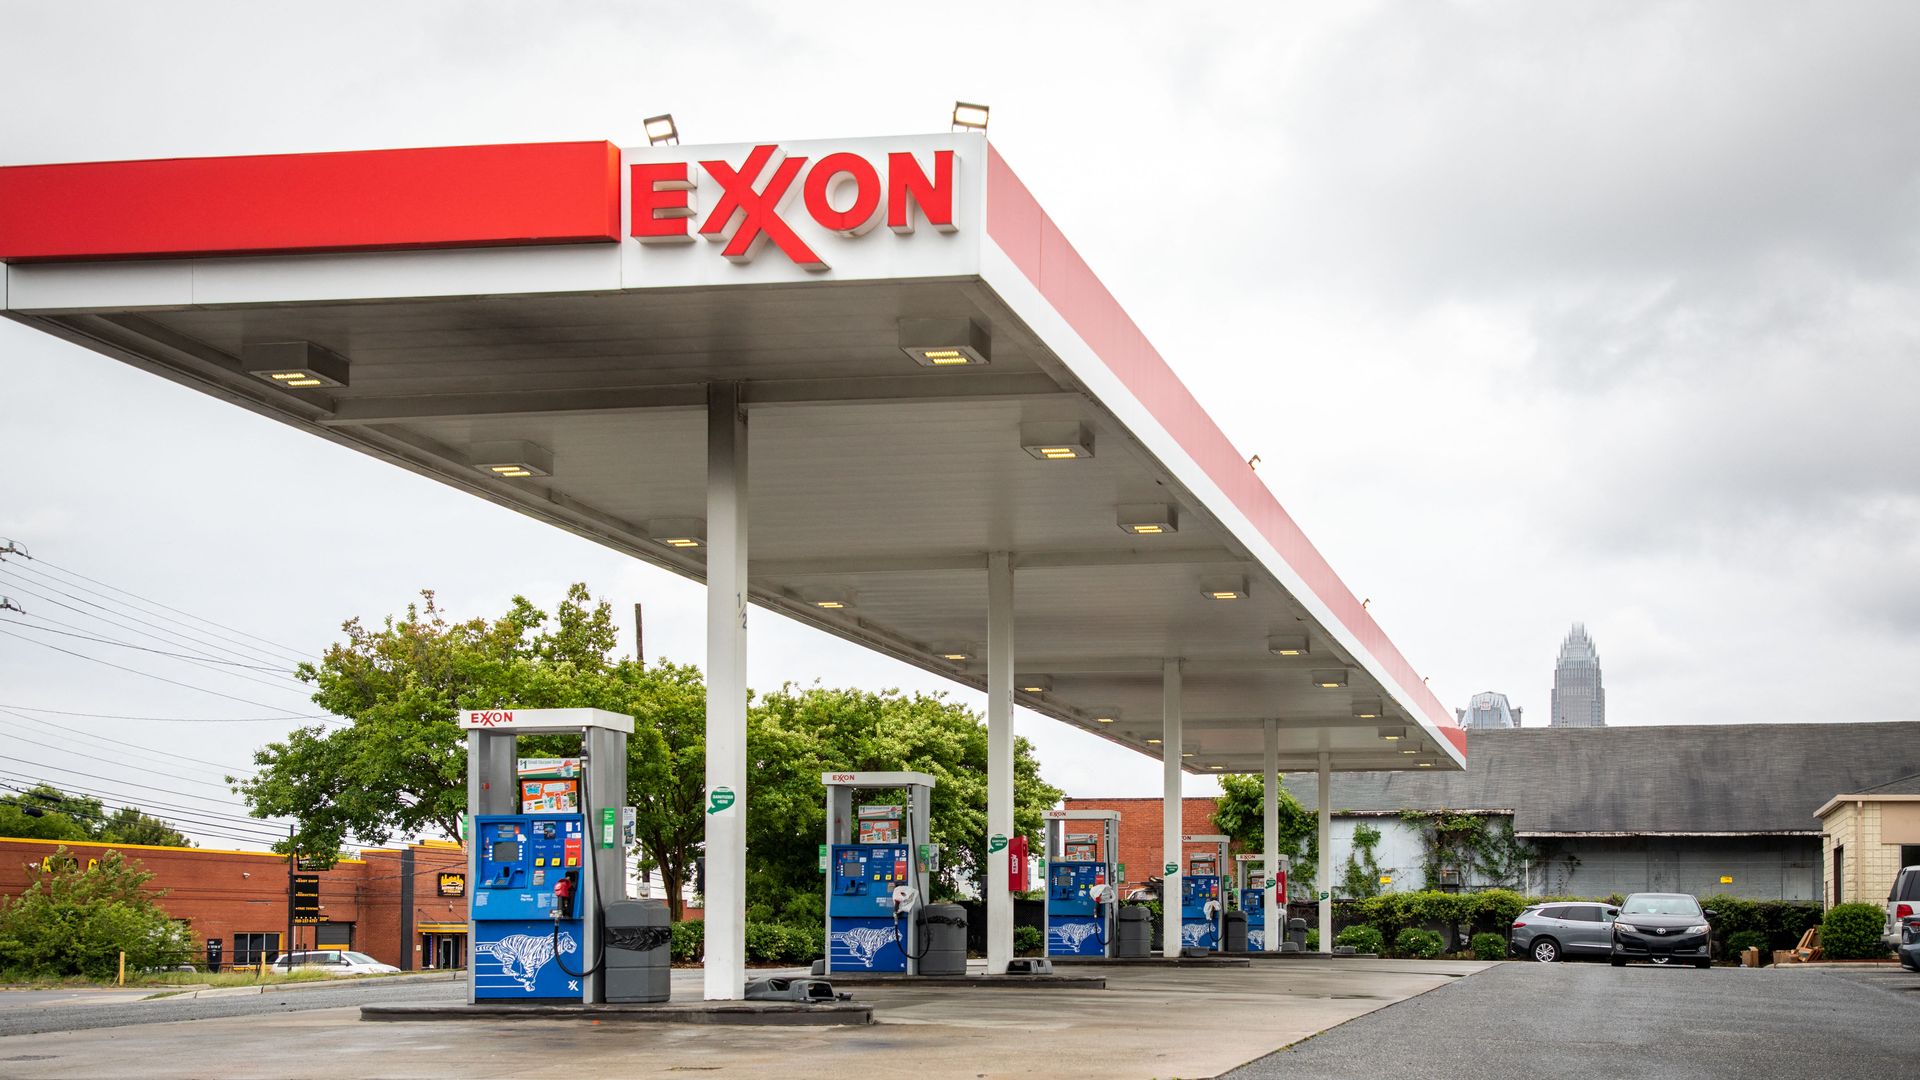 Exxon Mobil gas station without any cars.